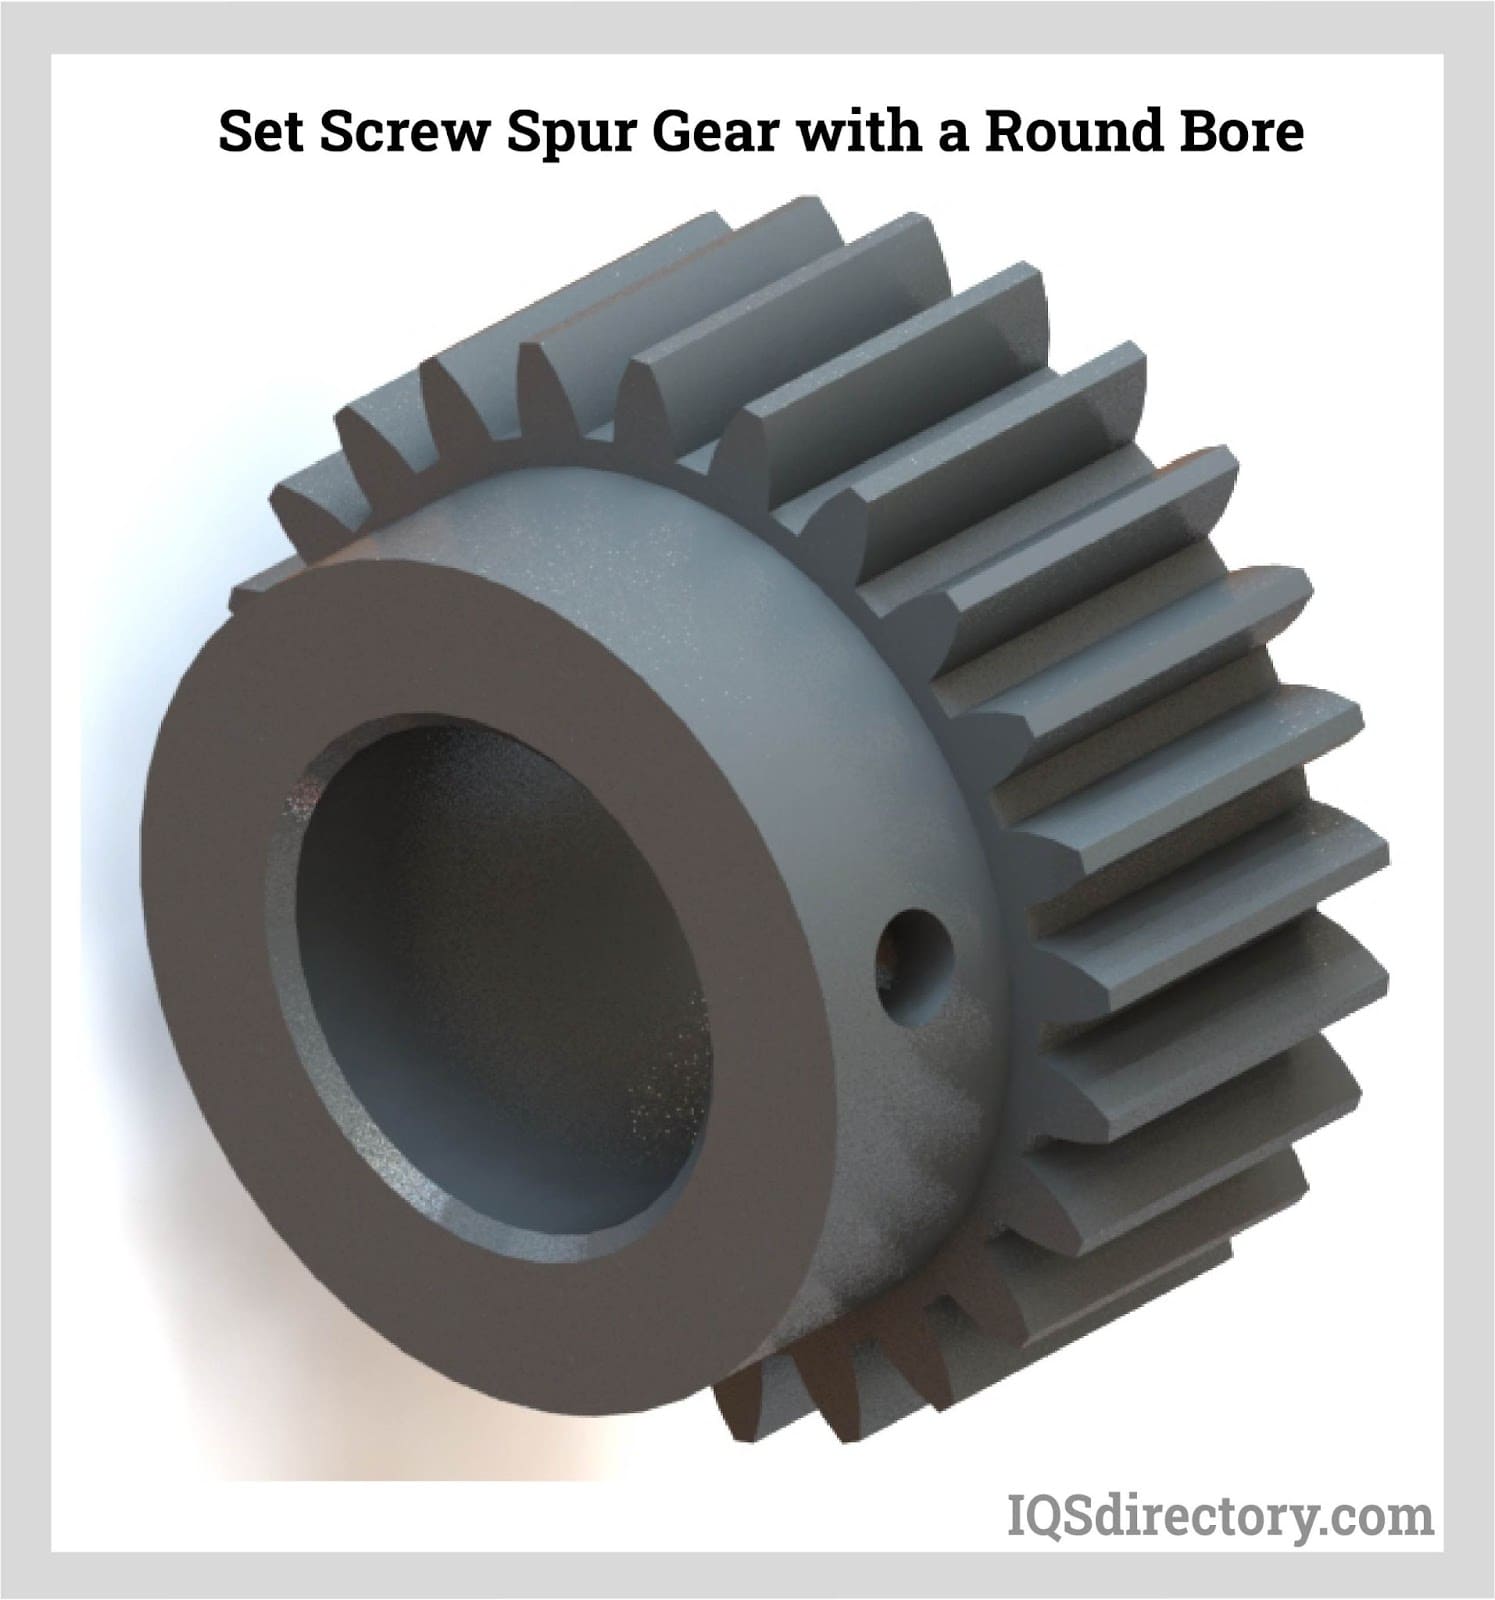 Set Screw Spur Gear with a Round Bore